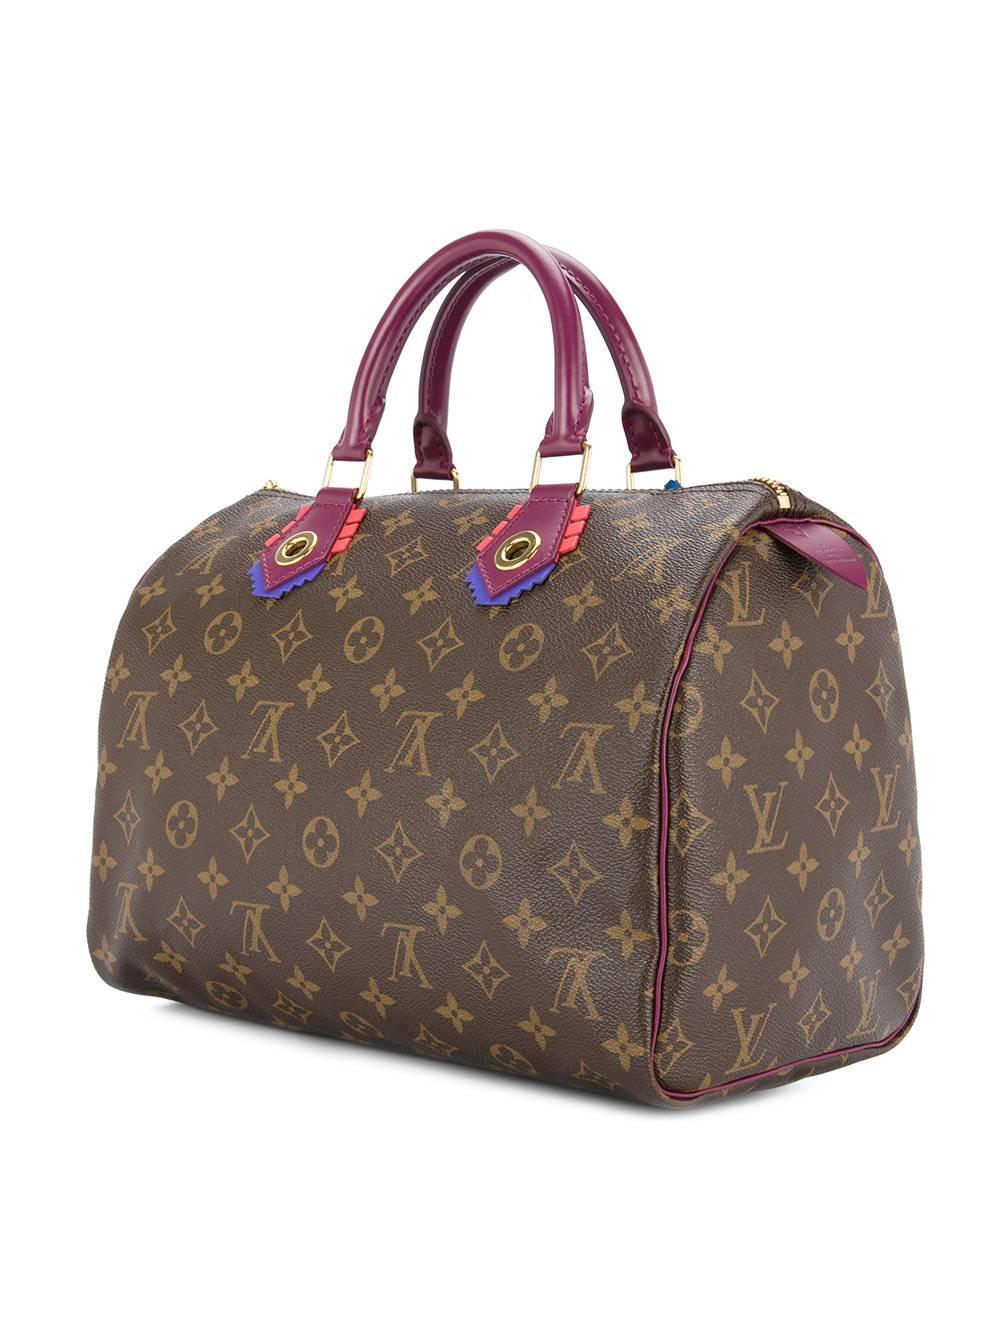 Women's Louis Vuitton Limited Edition Monogram Top Handle Satchel Bag With Lock and Keys